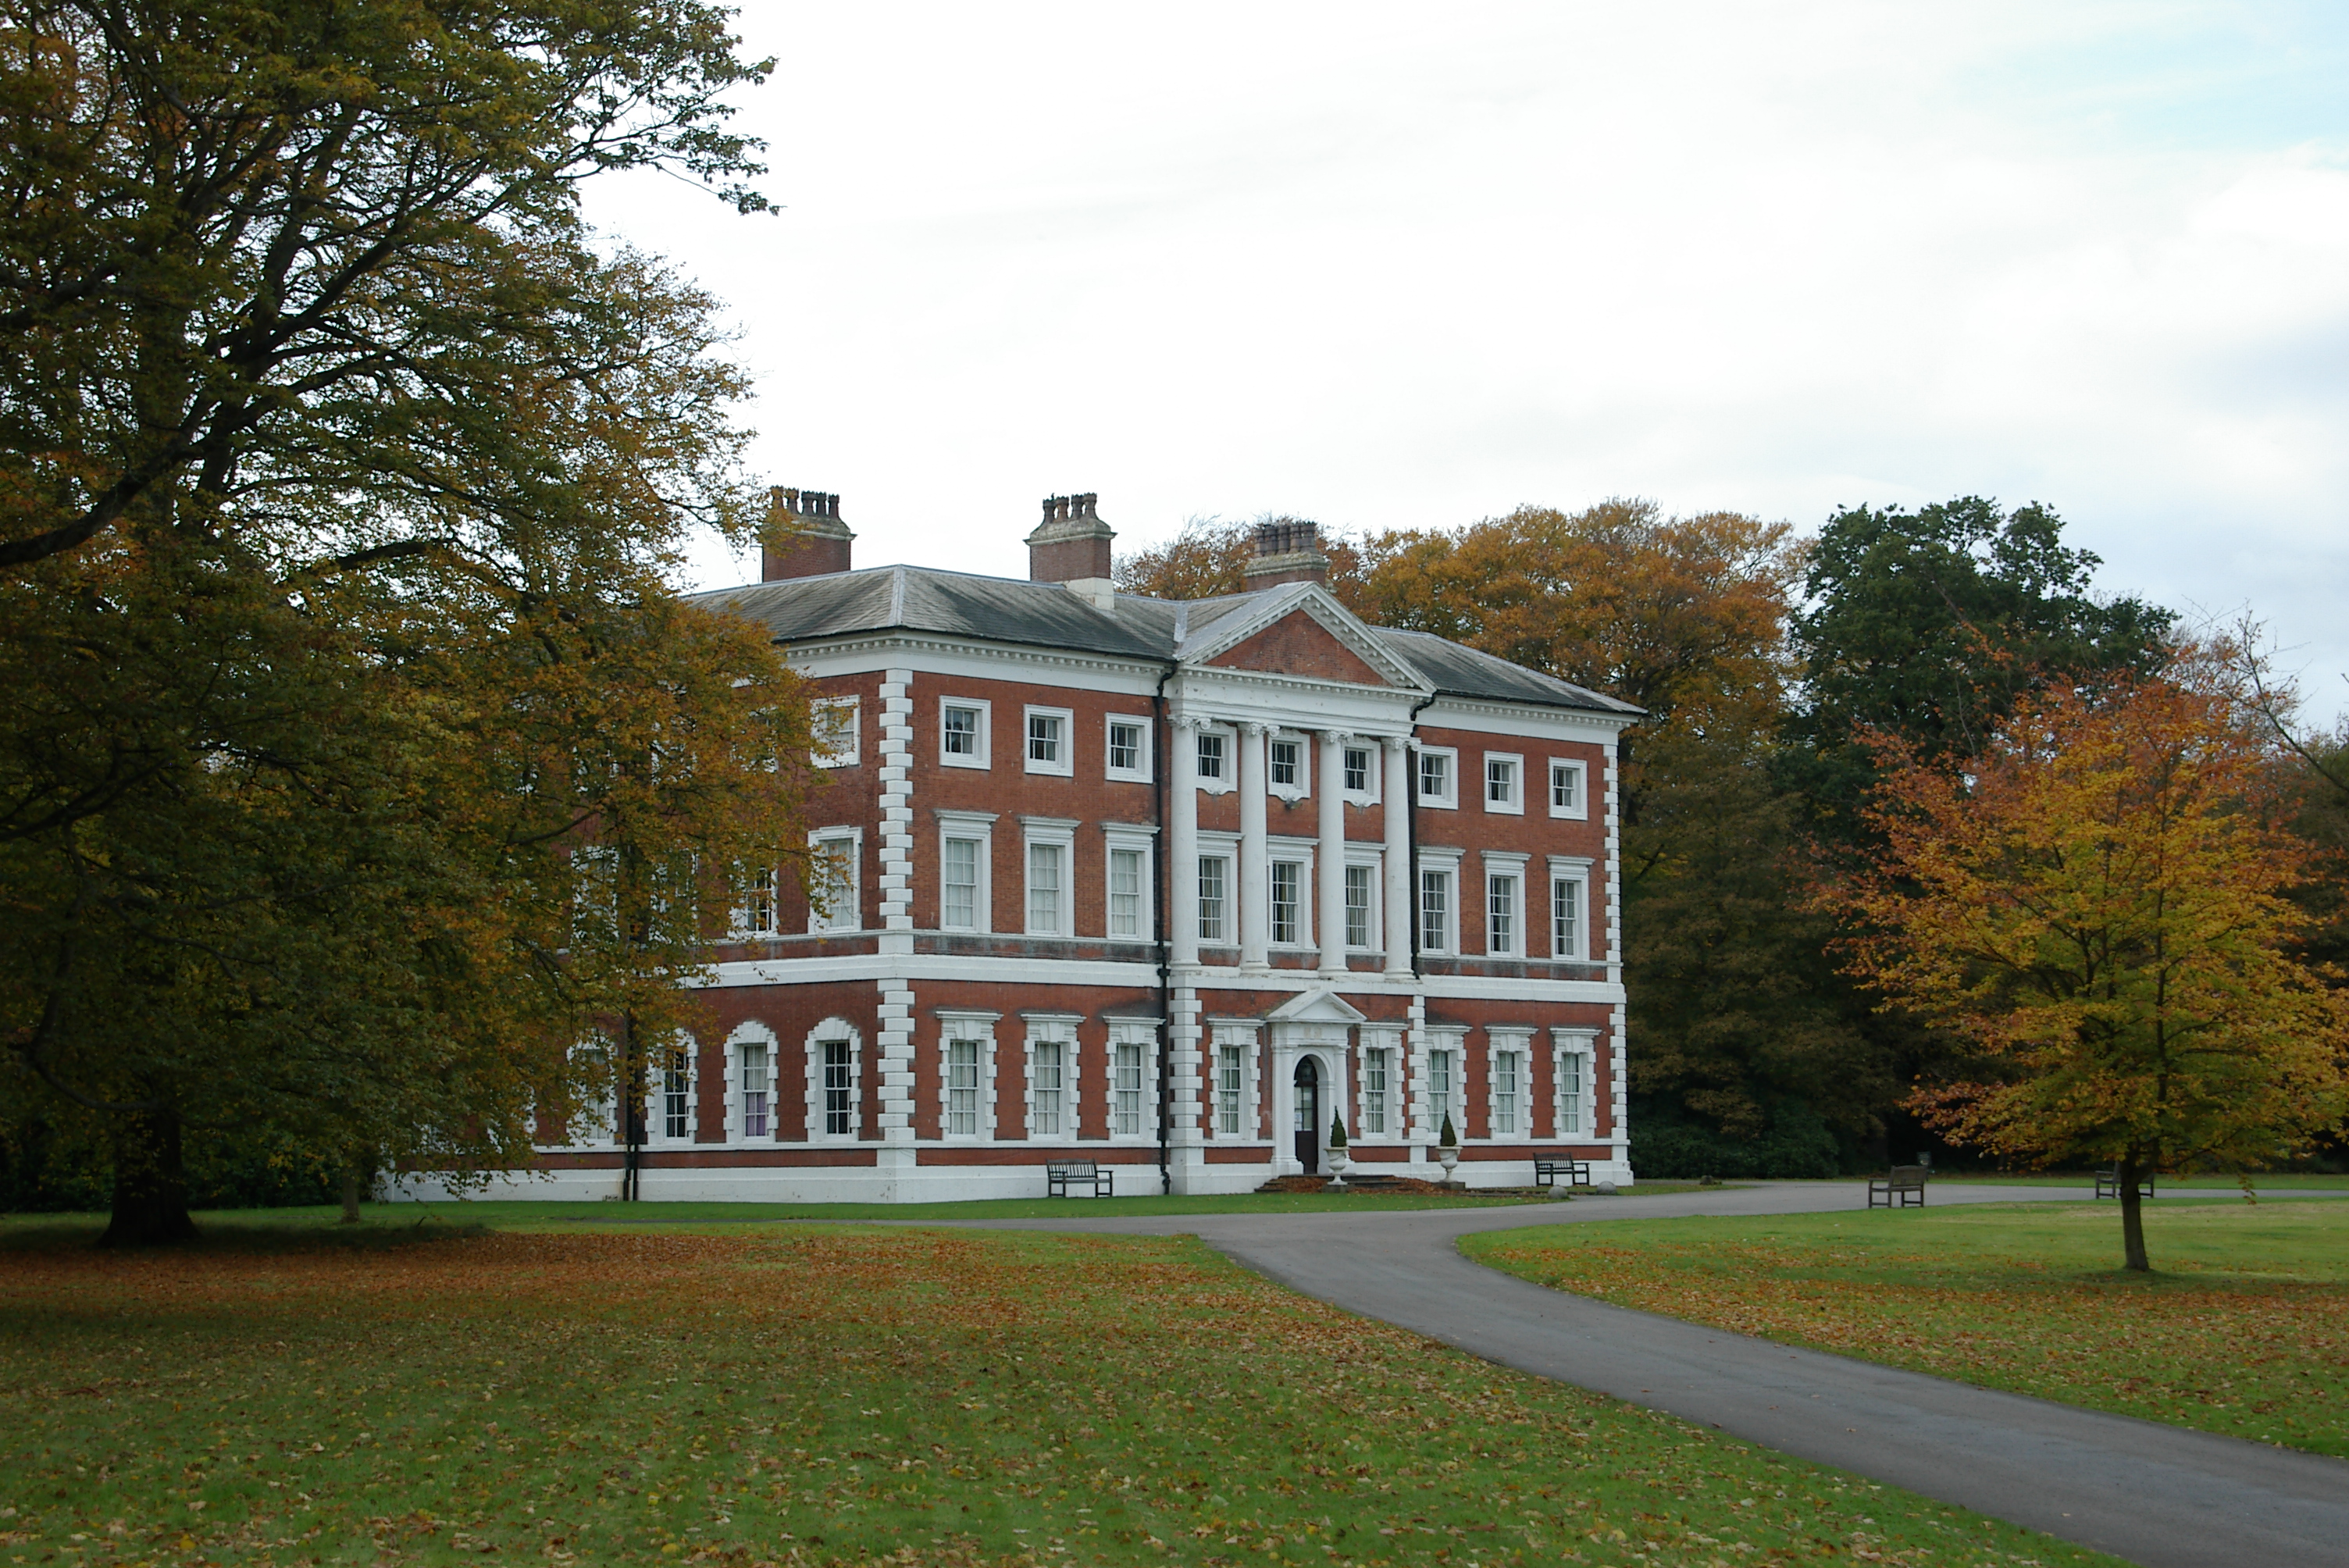 The Friends of Lytham Hall – Registered Charity 1069442